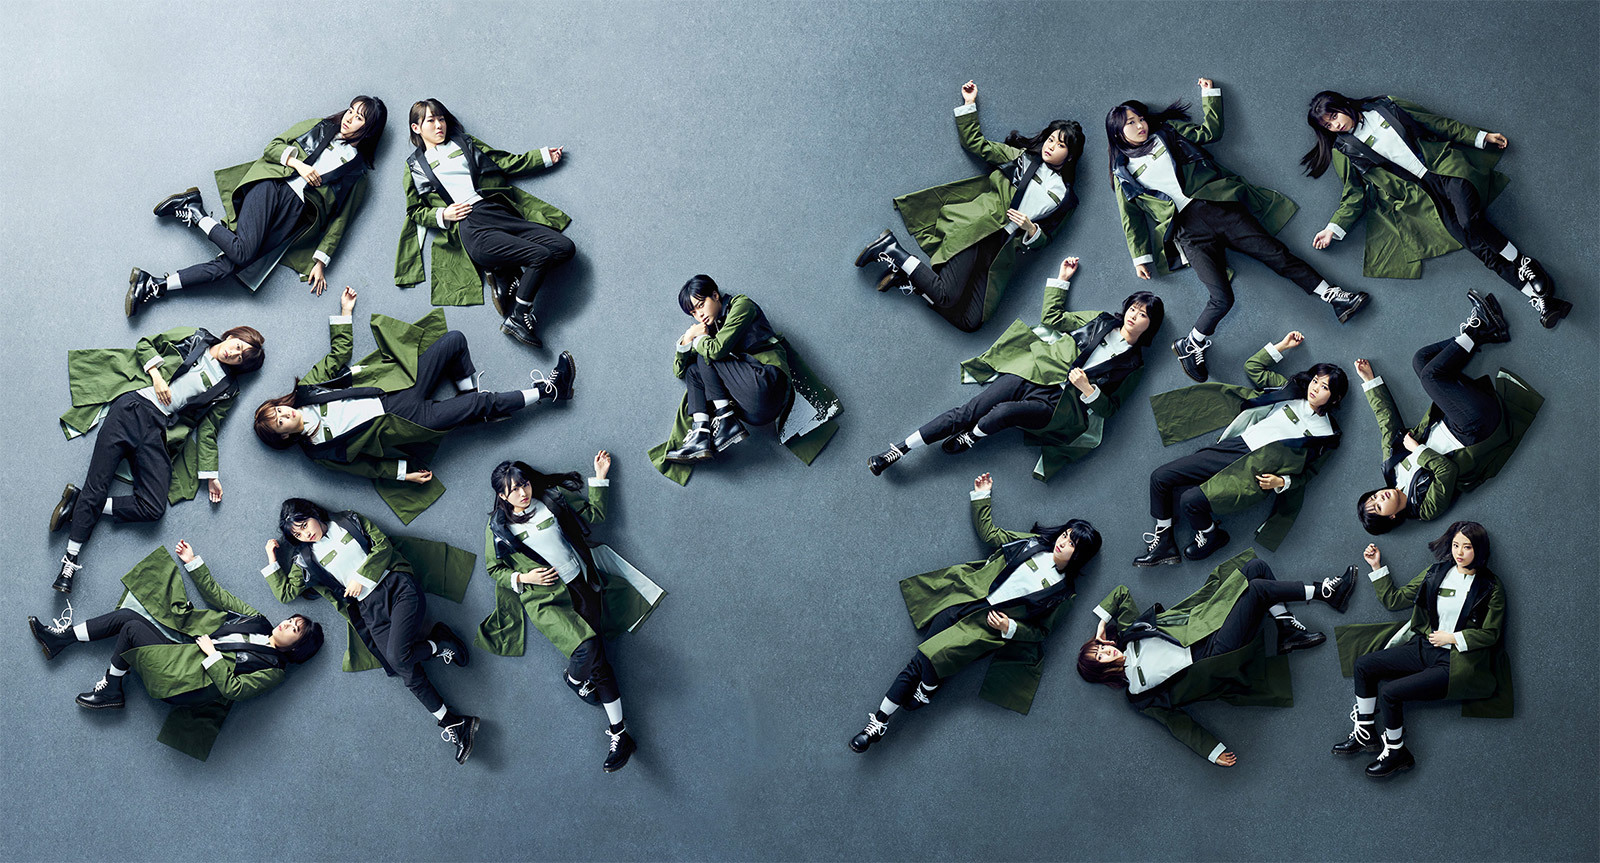 keyakizaka46 black sheep promotional banner featuring the members laying on a floor, the camera taking a shot from above, isolated by themselves wearing long green jackets with pensive looks. the center of the song, hirate yurina, is in the middle, curled into herself